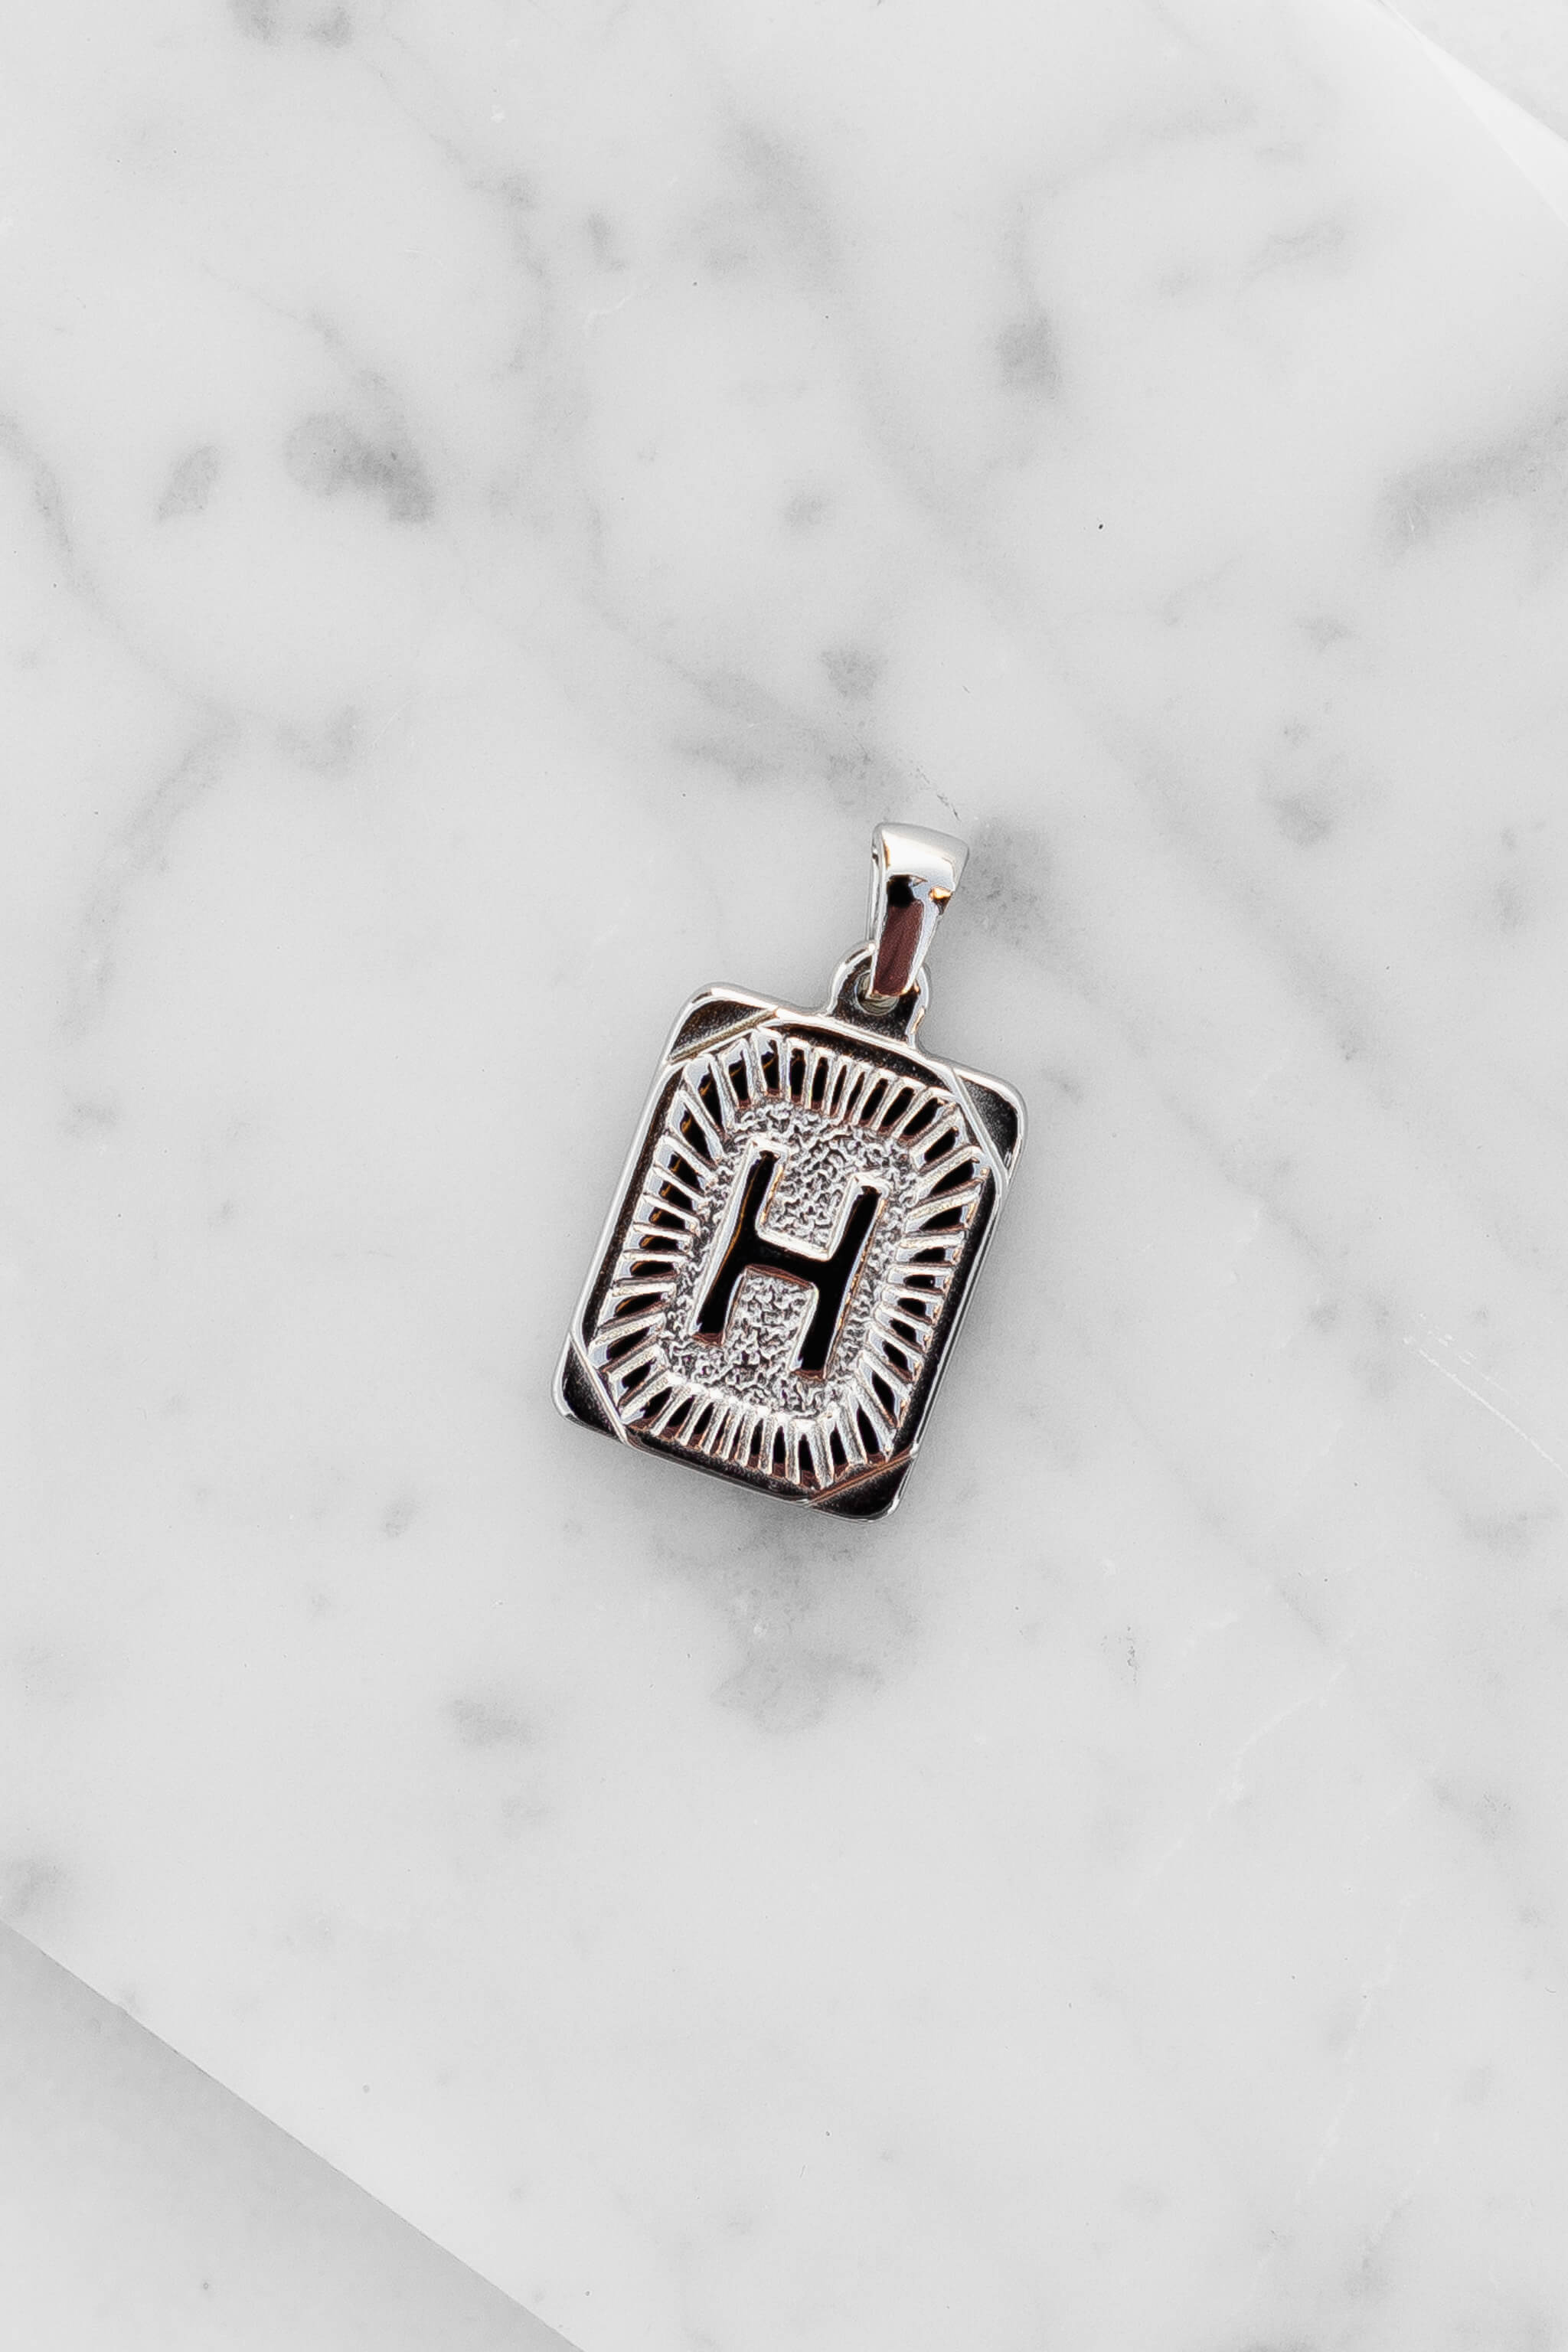 Silver Monogram Letter "H" Charm laying on a marble